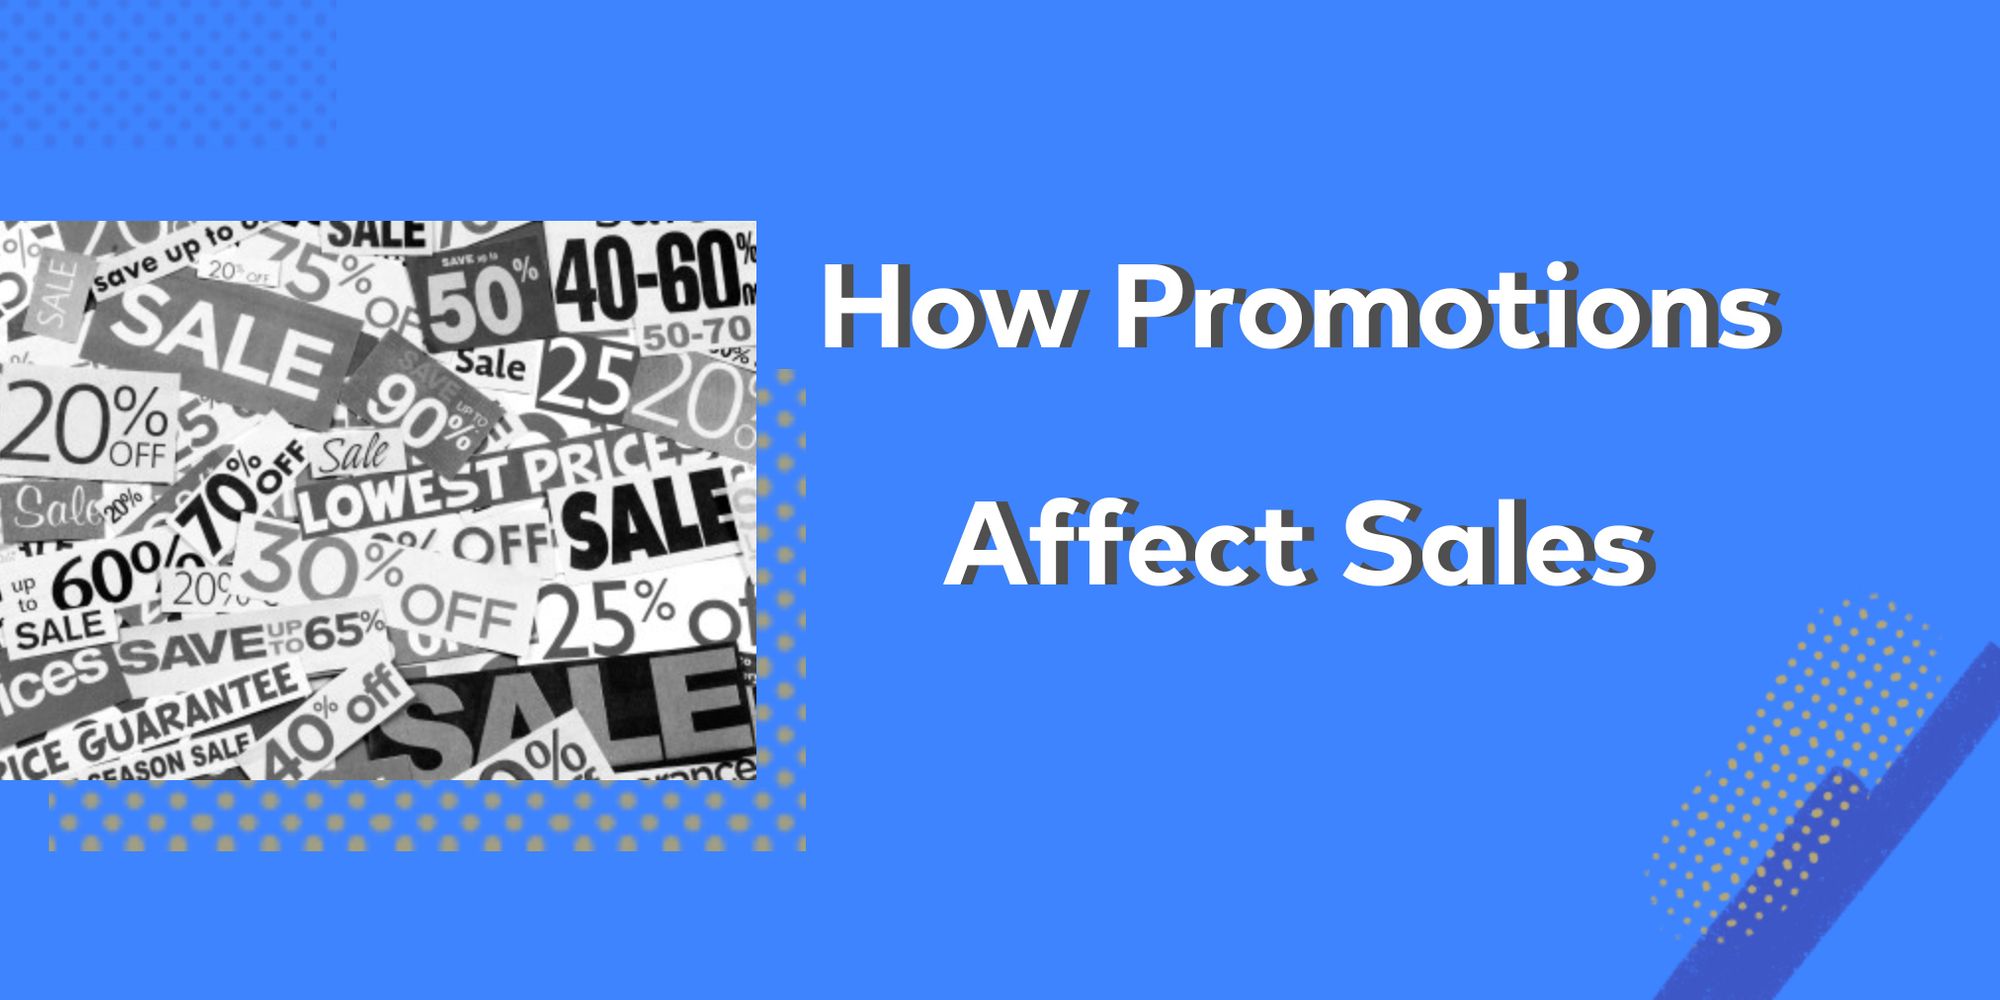 The effect of promotions on sales in retail